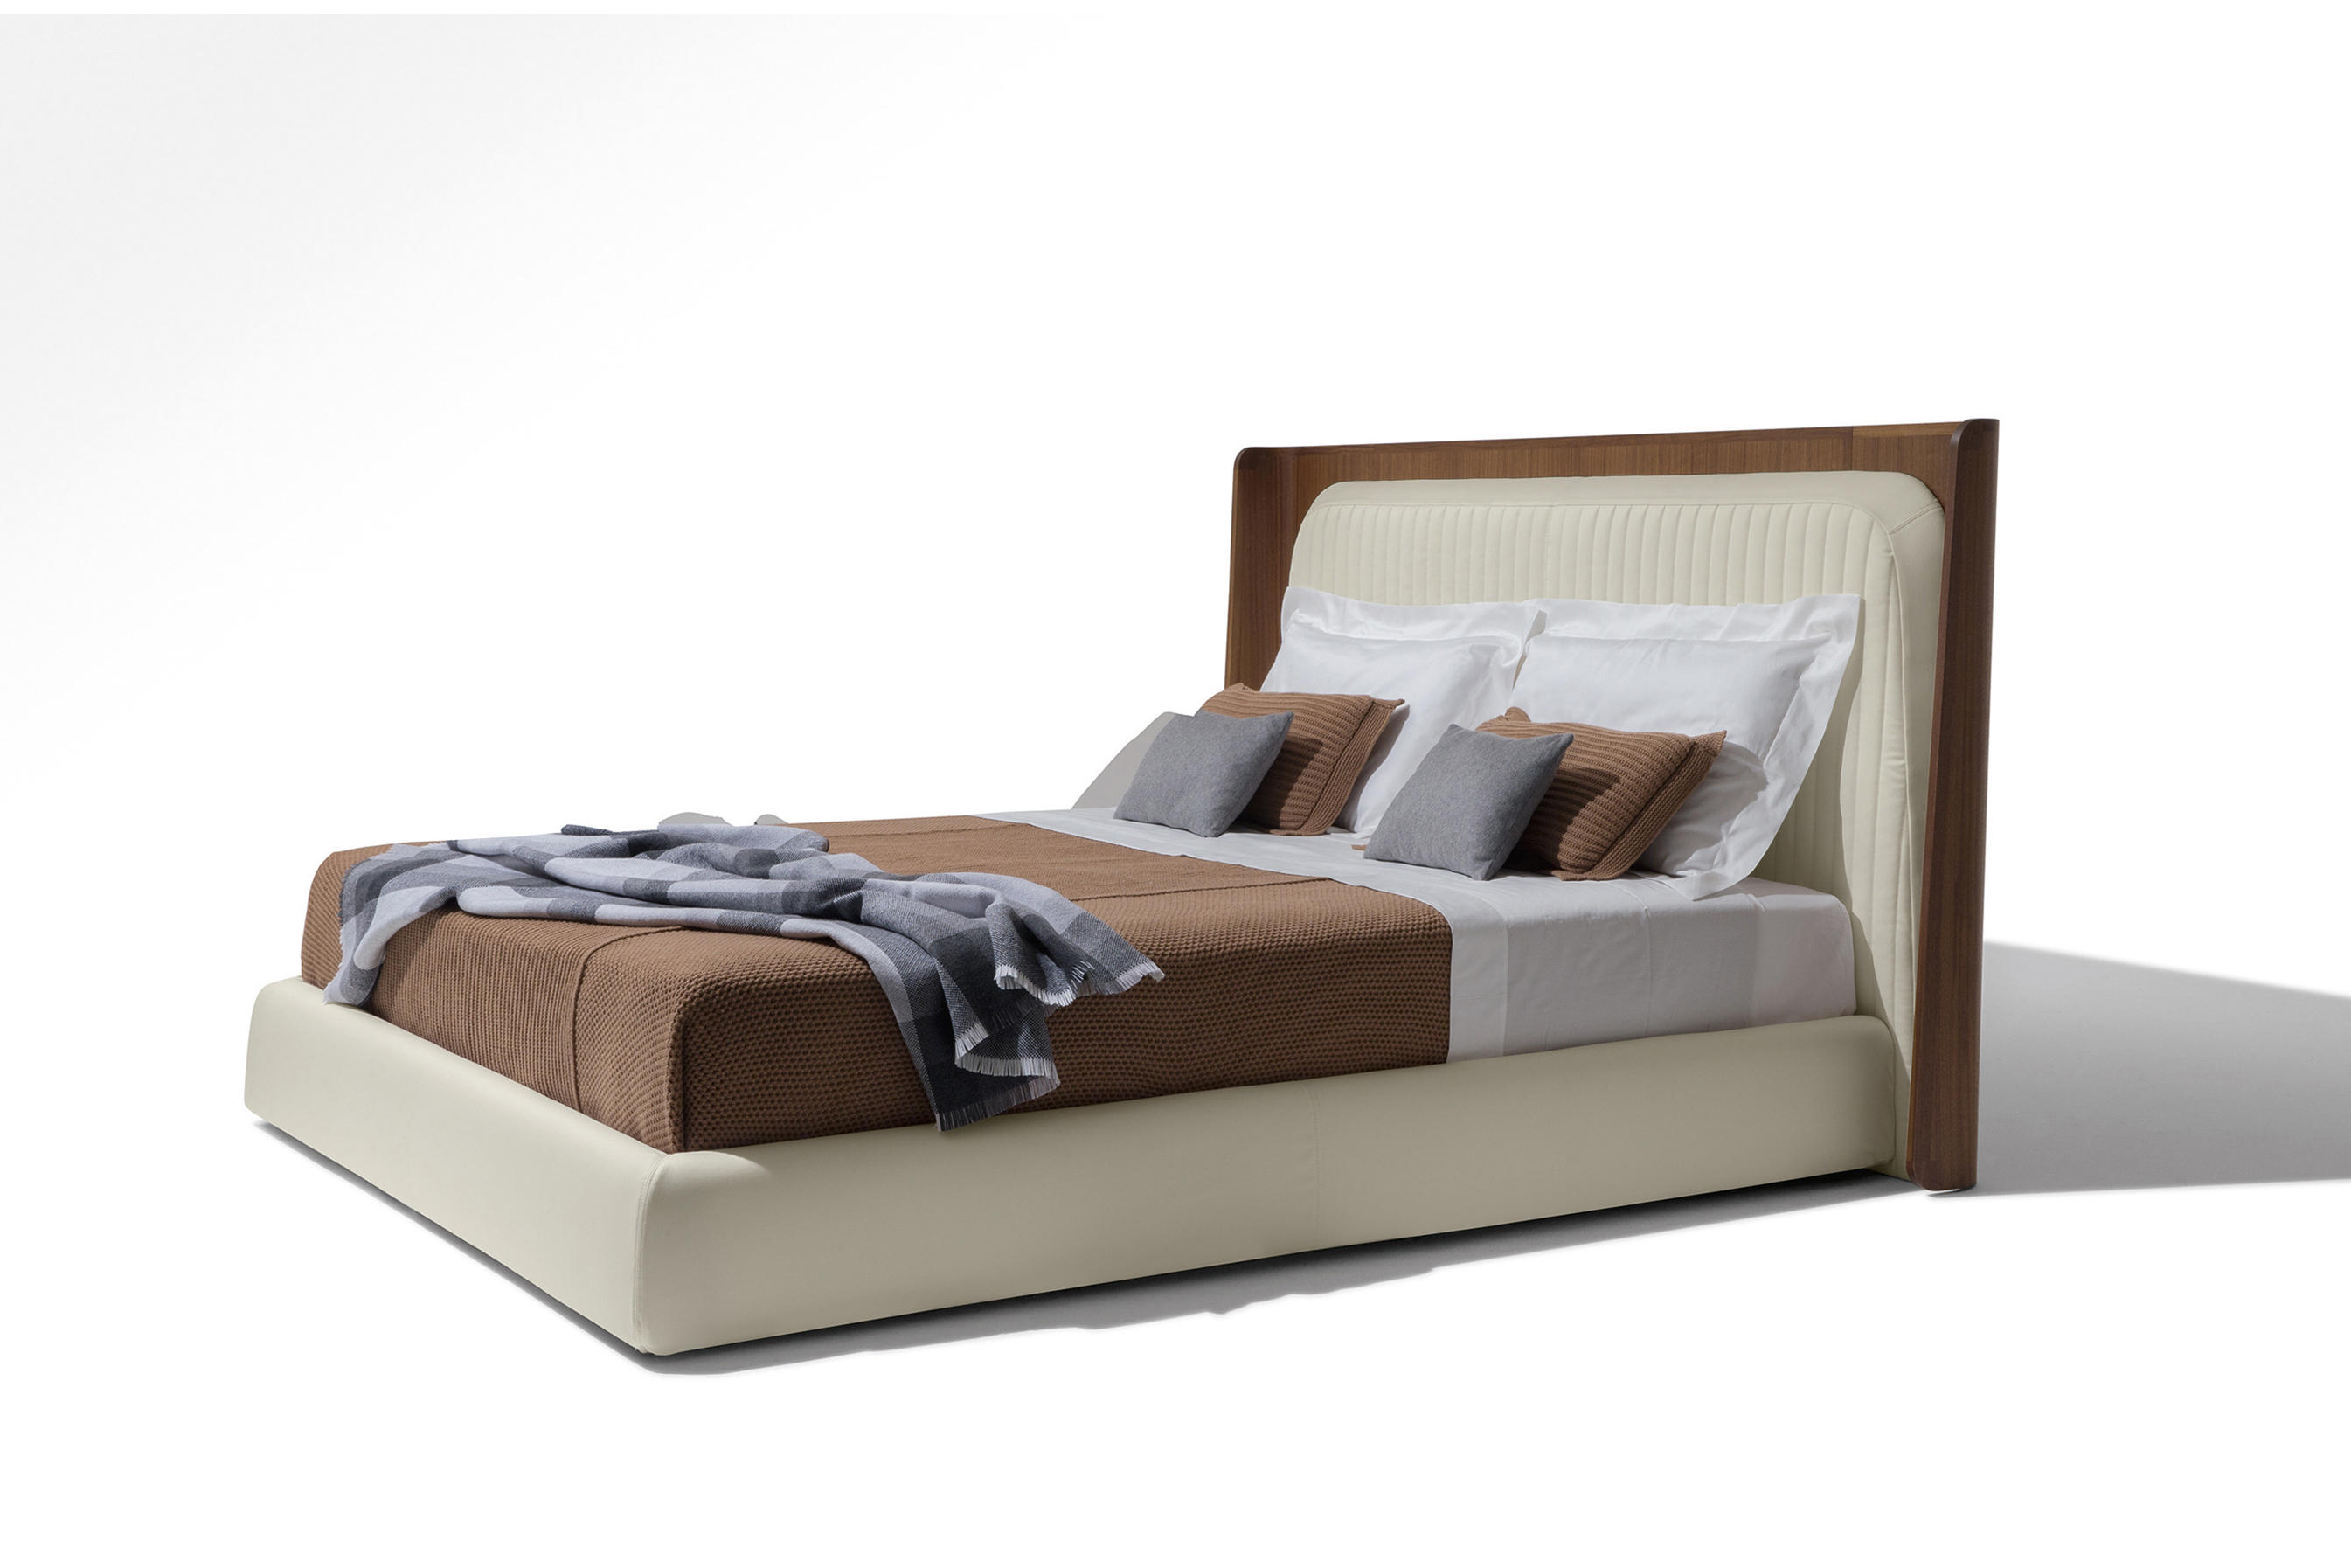 hypnos double bed mattress